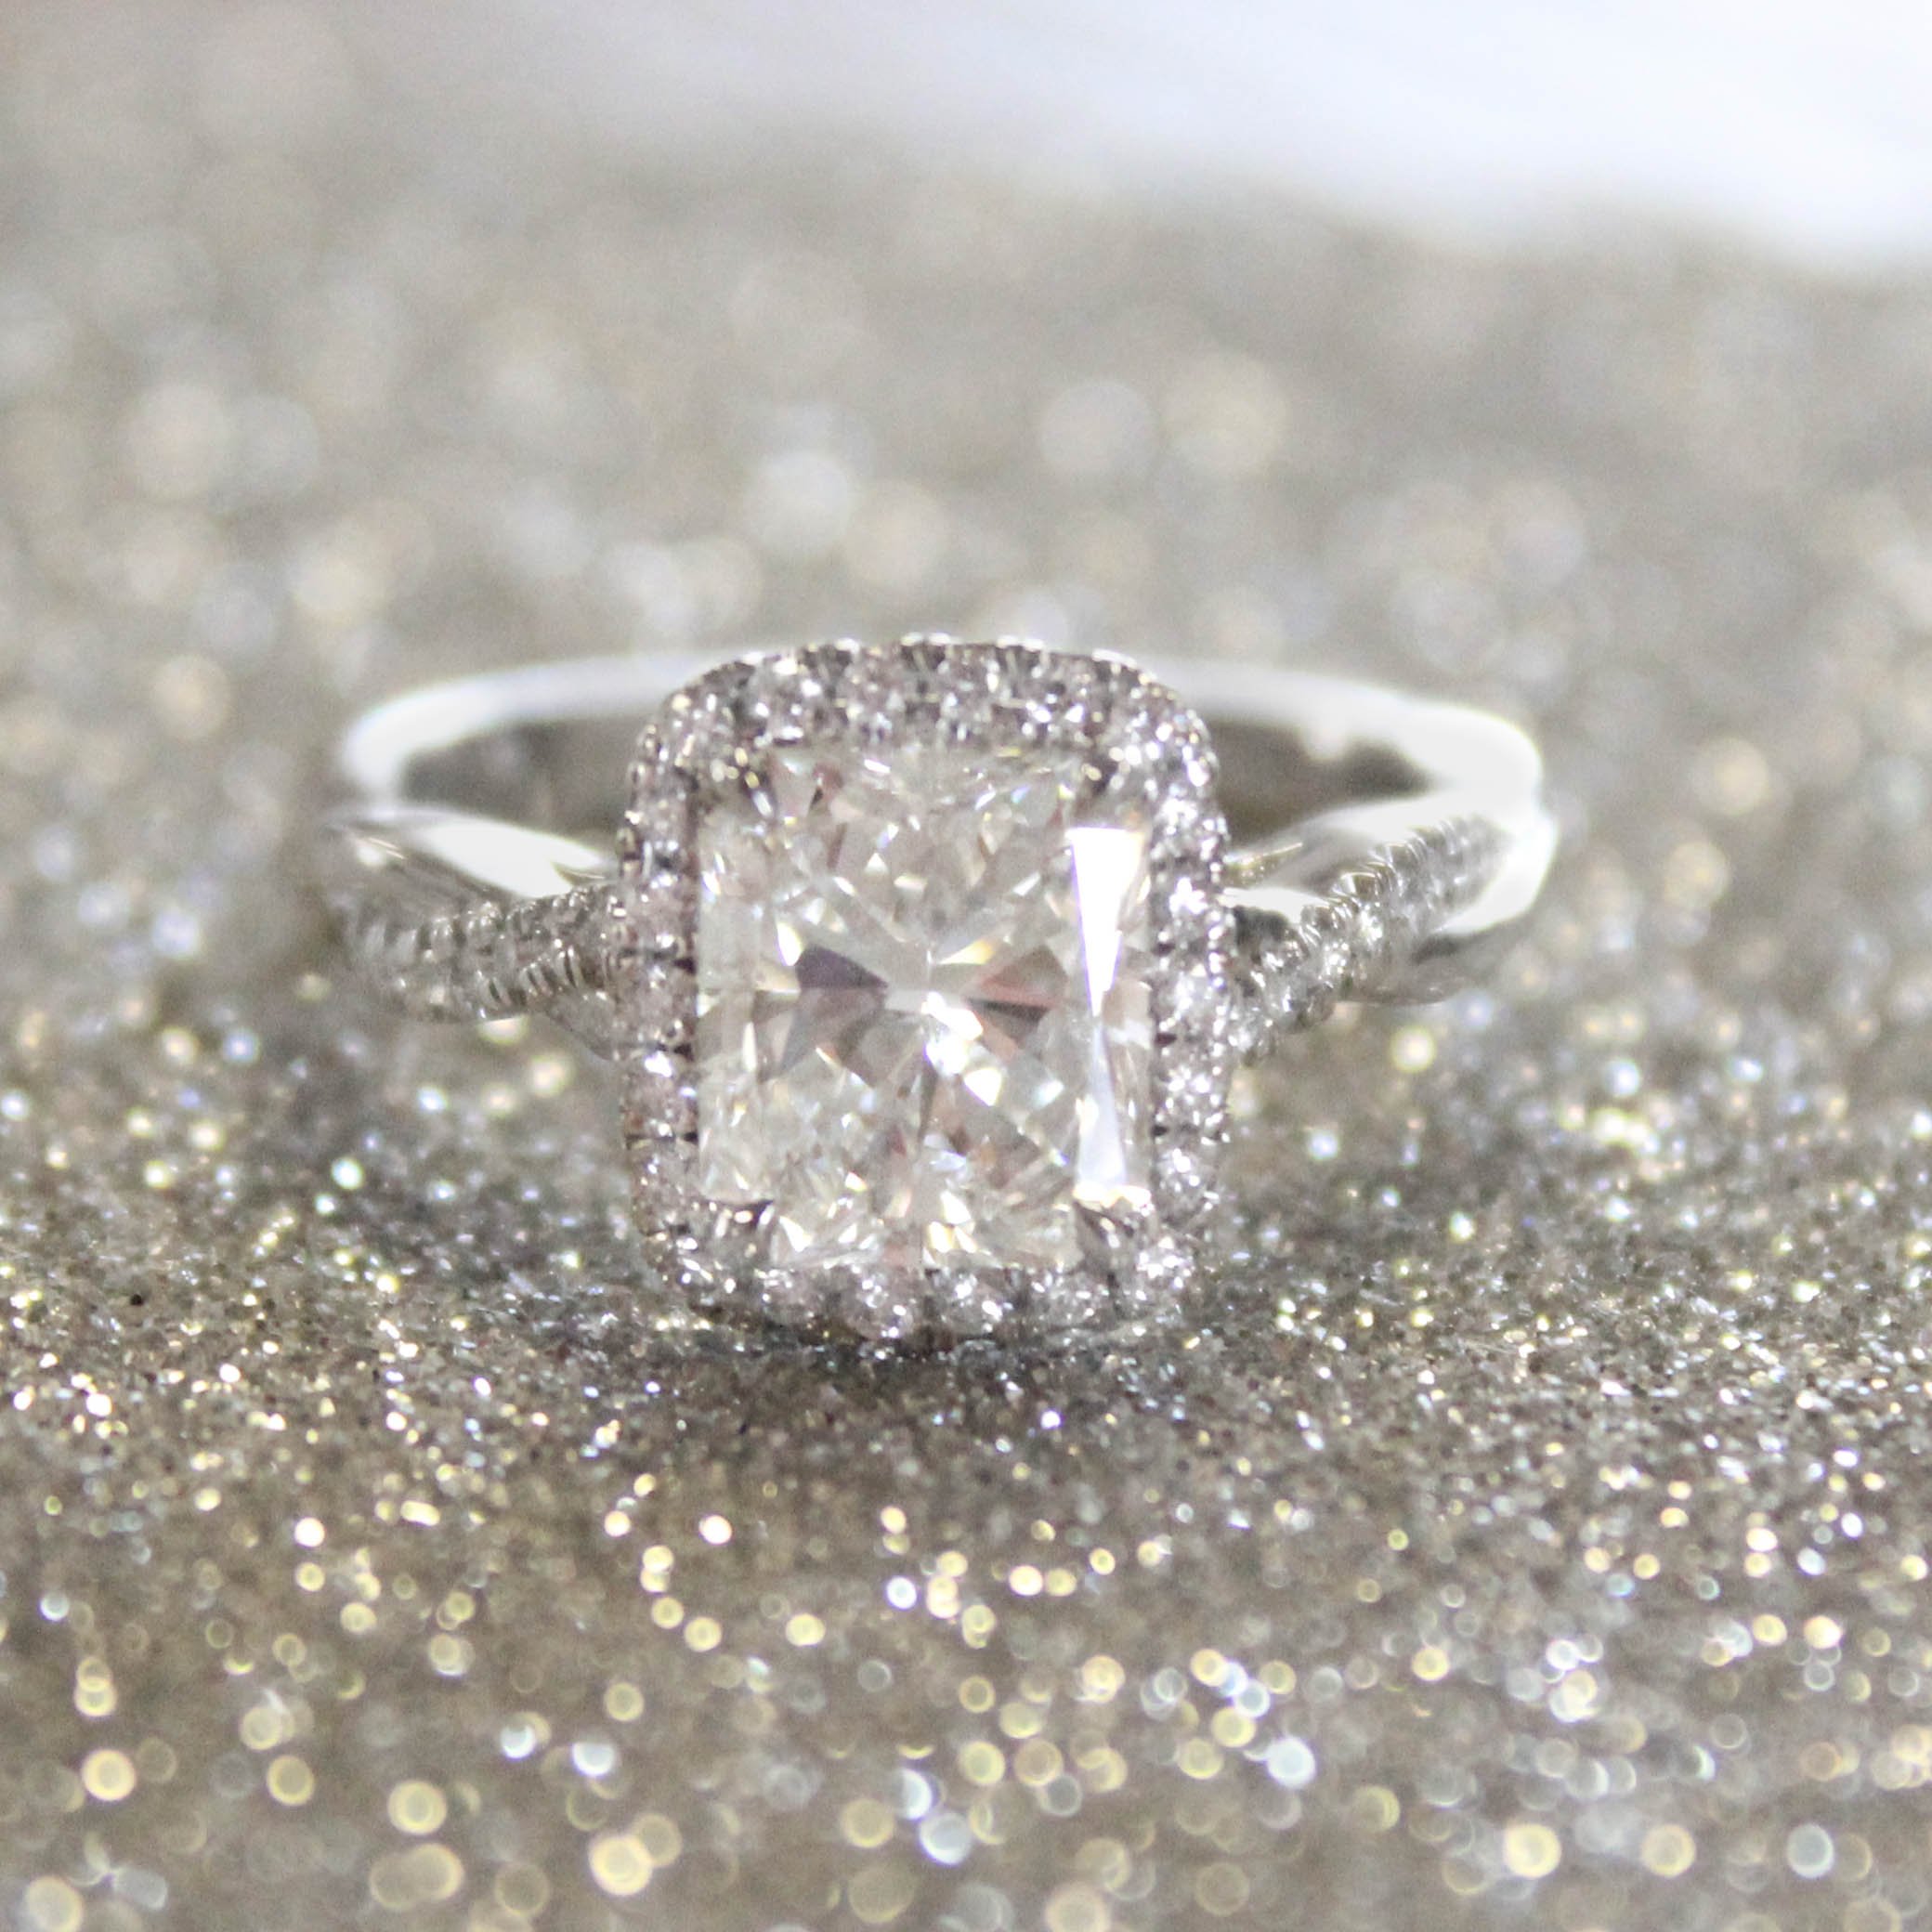 The 7 Most Beautiful Radiant Cut Engagement Rings | Brilliant Earth